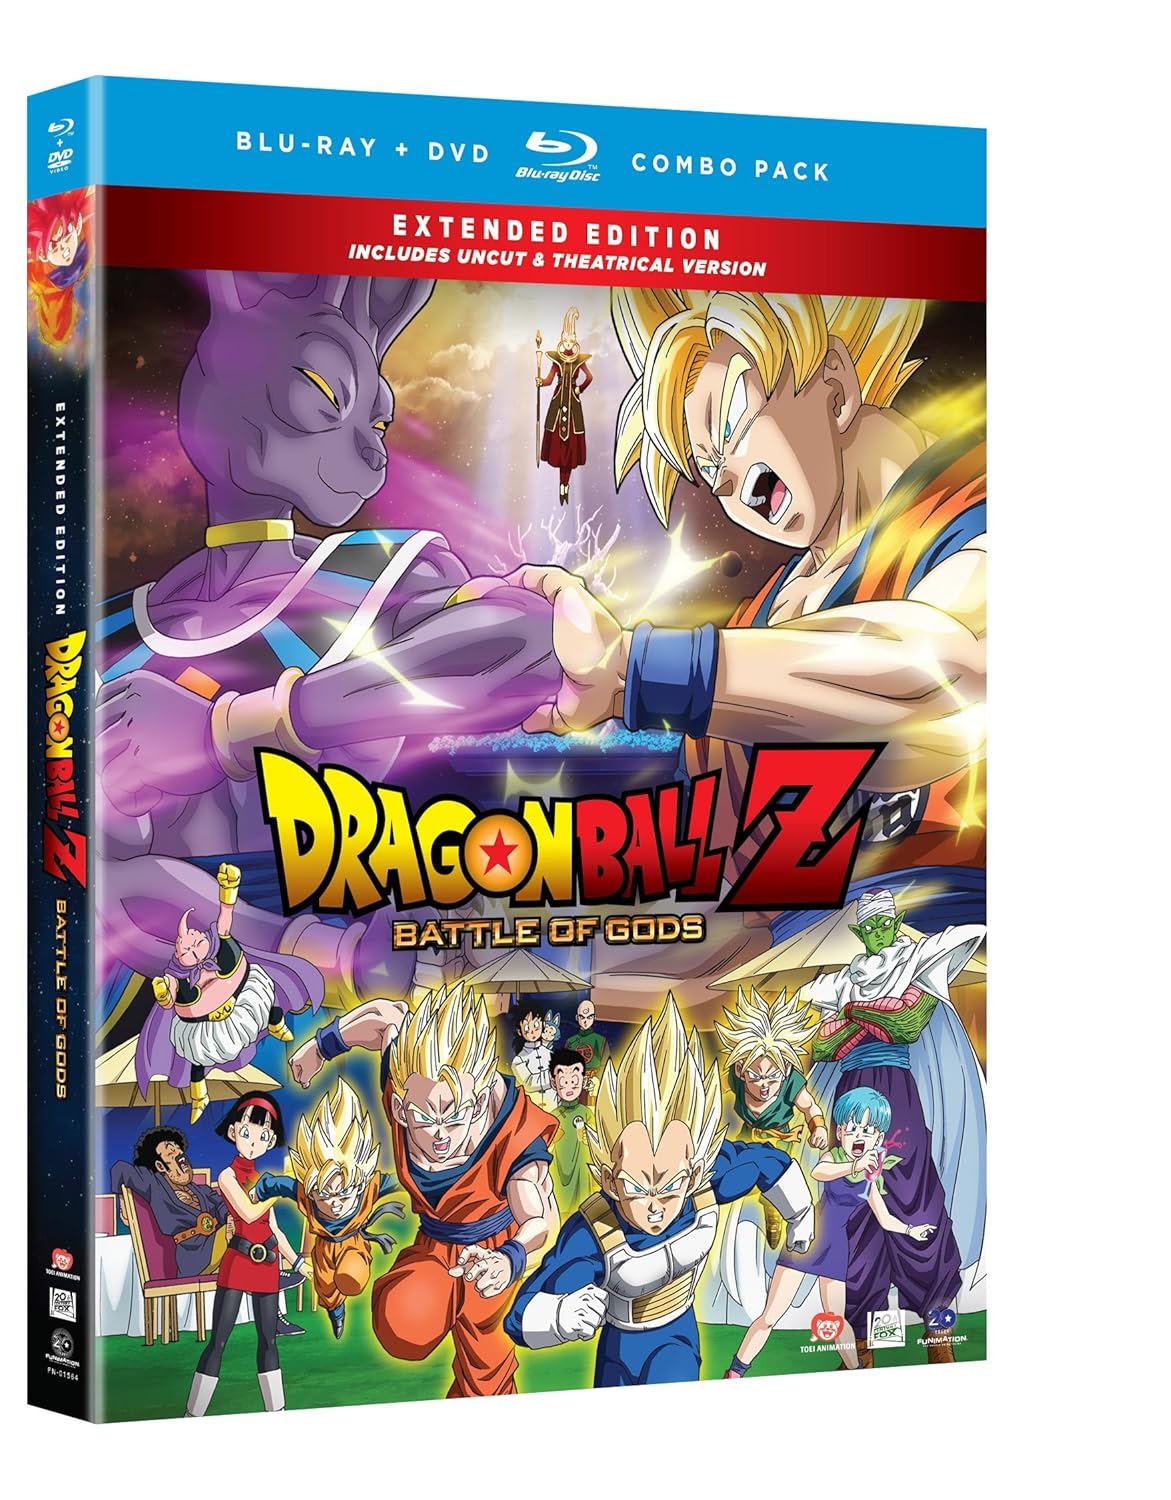 85% 502 part 2.3/4 dragon ball final remastered. Complementary Products To Purchase Along With Dragon Ball Xenoverse Game Idealist